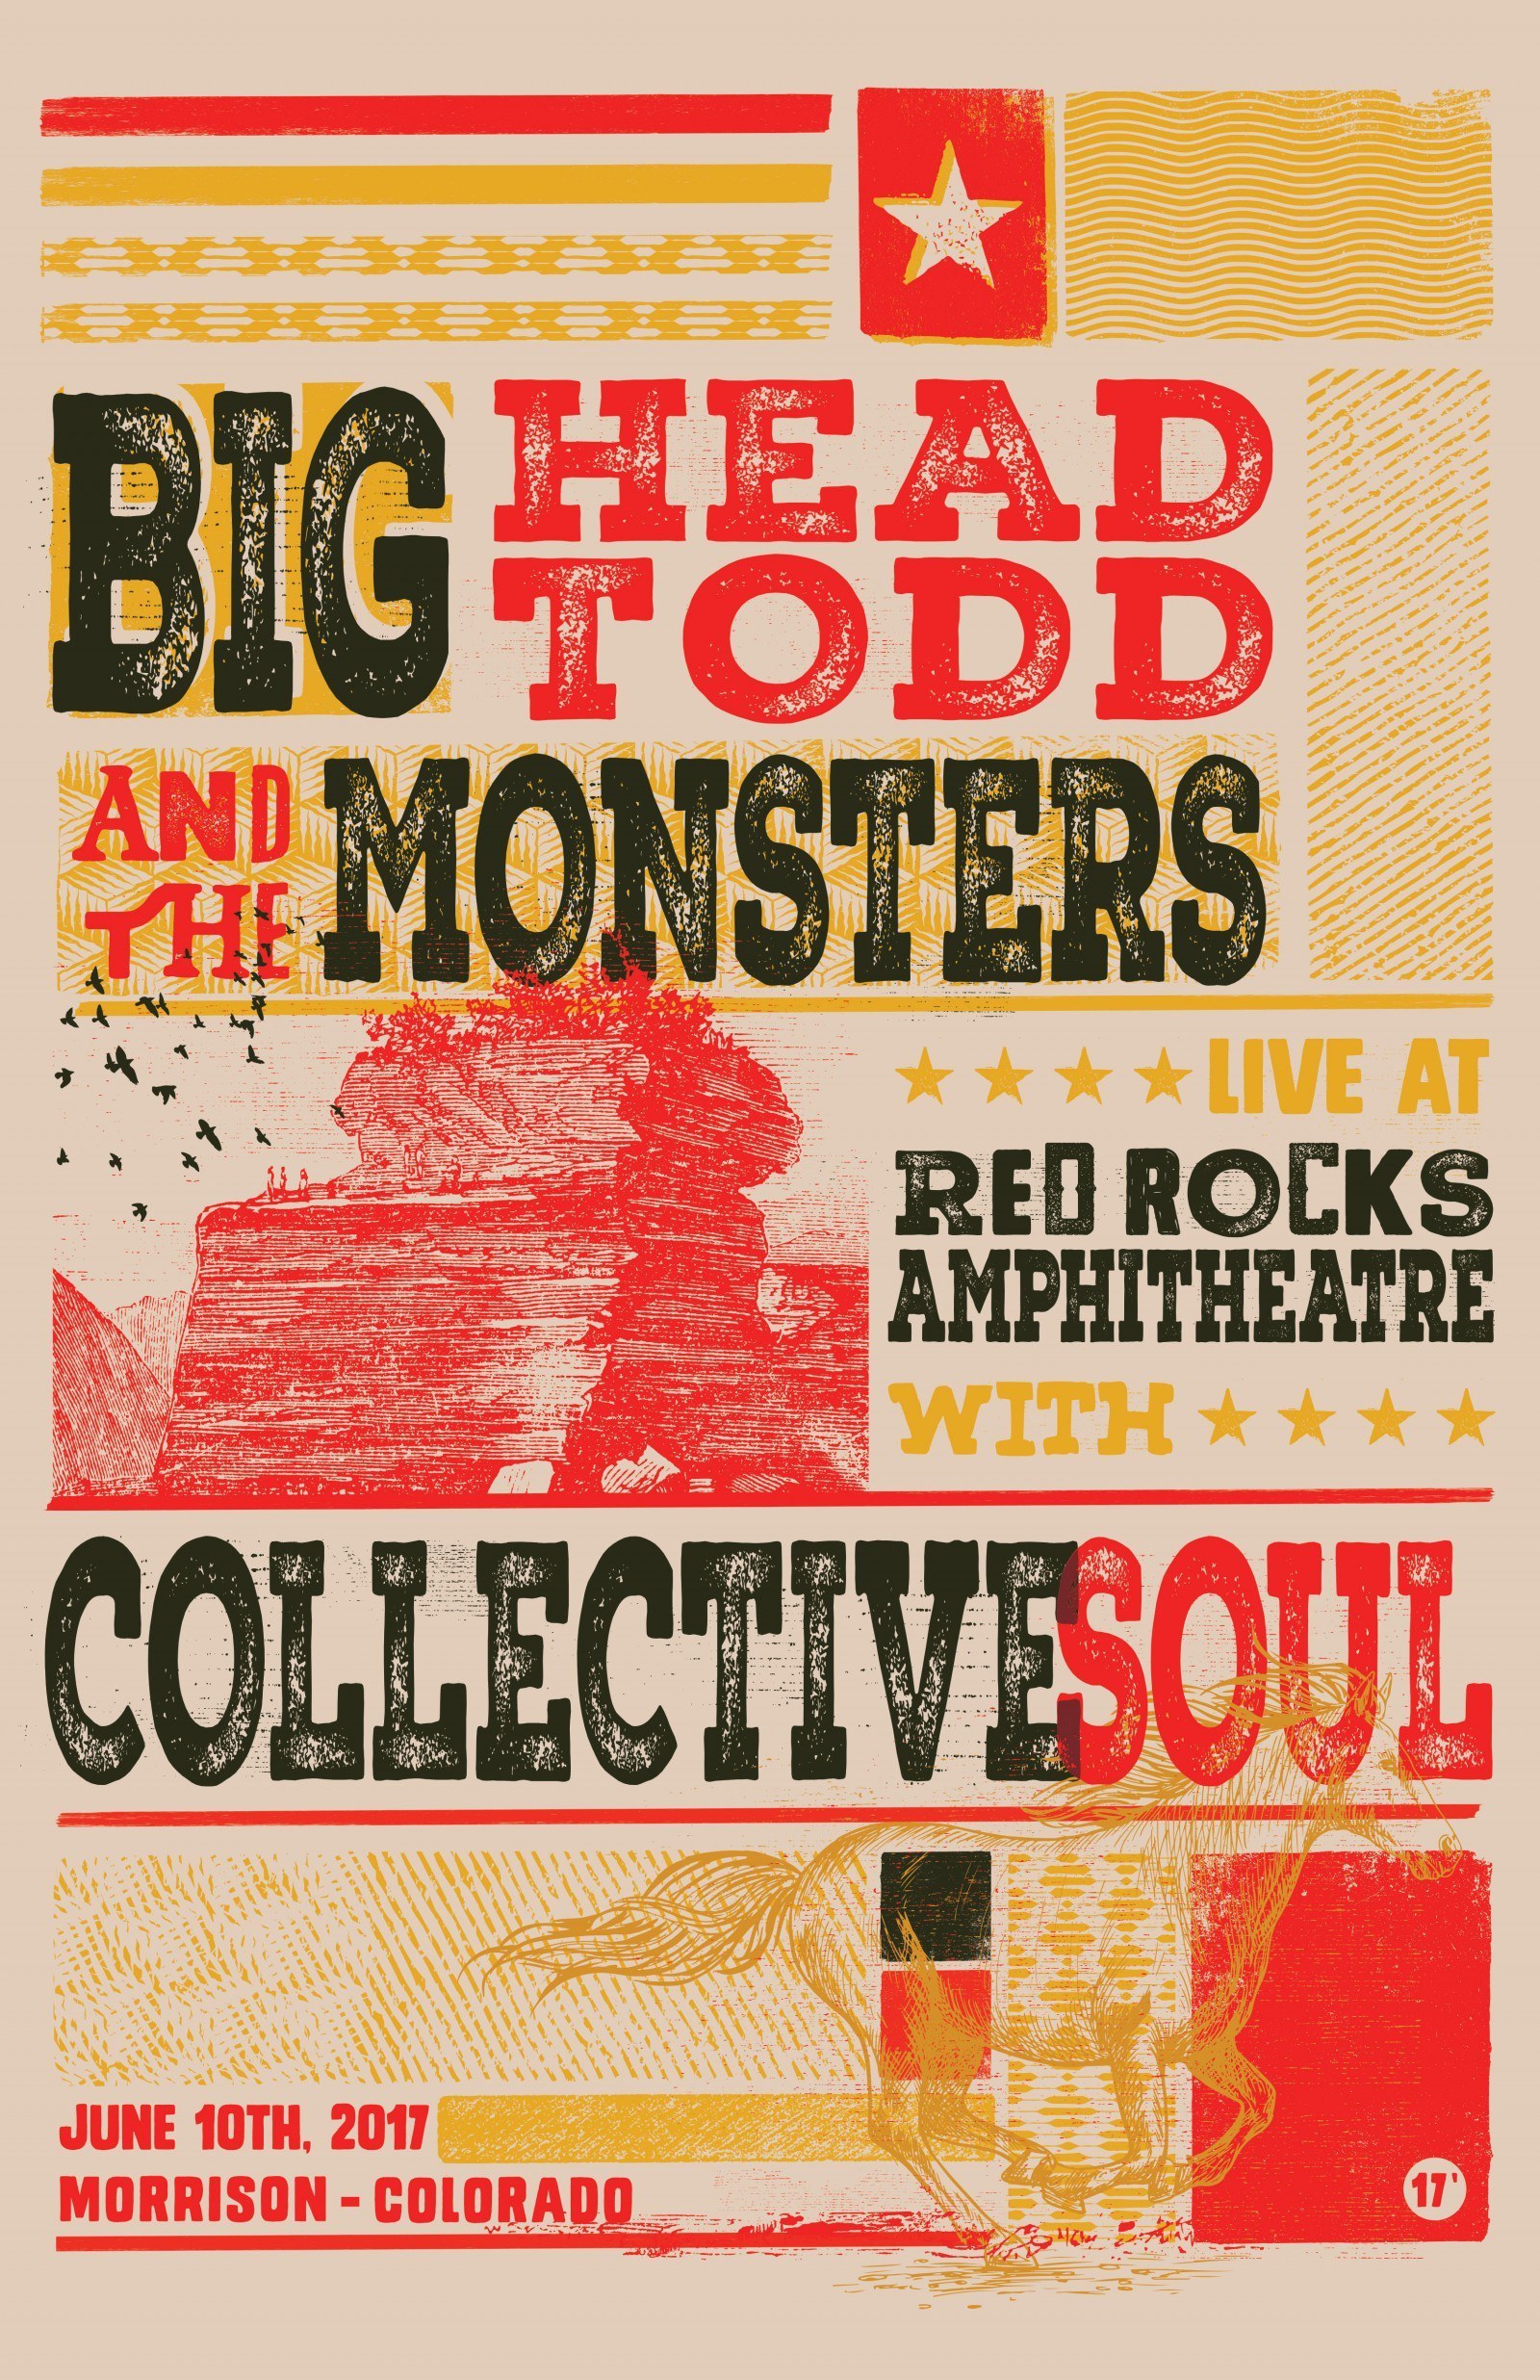 Public Tickets ON SALE NOW to Big Head Todd & The Monsters at Red Rocks on June 10th